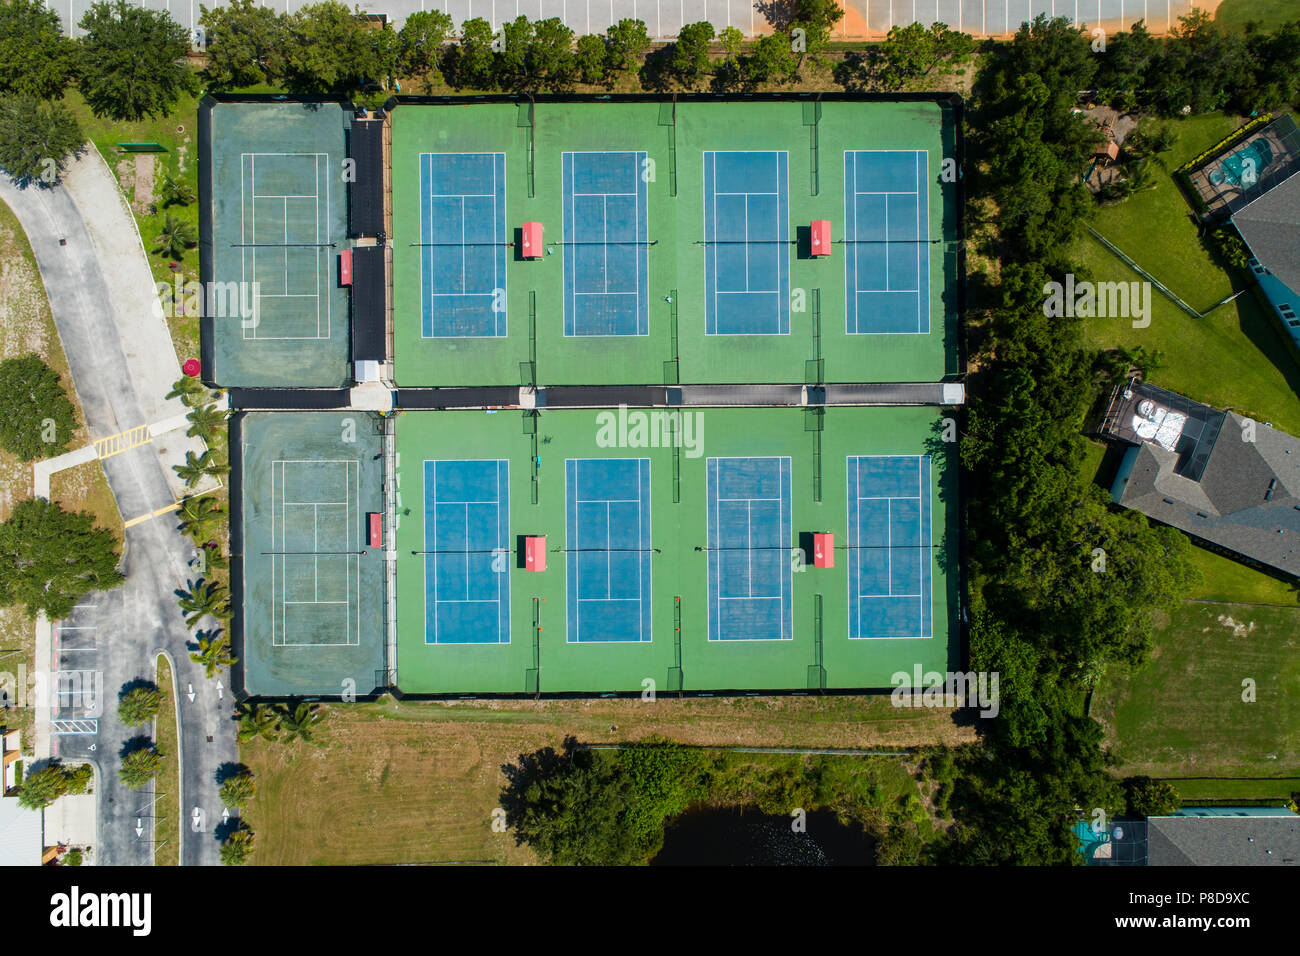 Aerial view of ten empty tennis courts complete with lines and nets Stock Photo